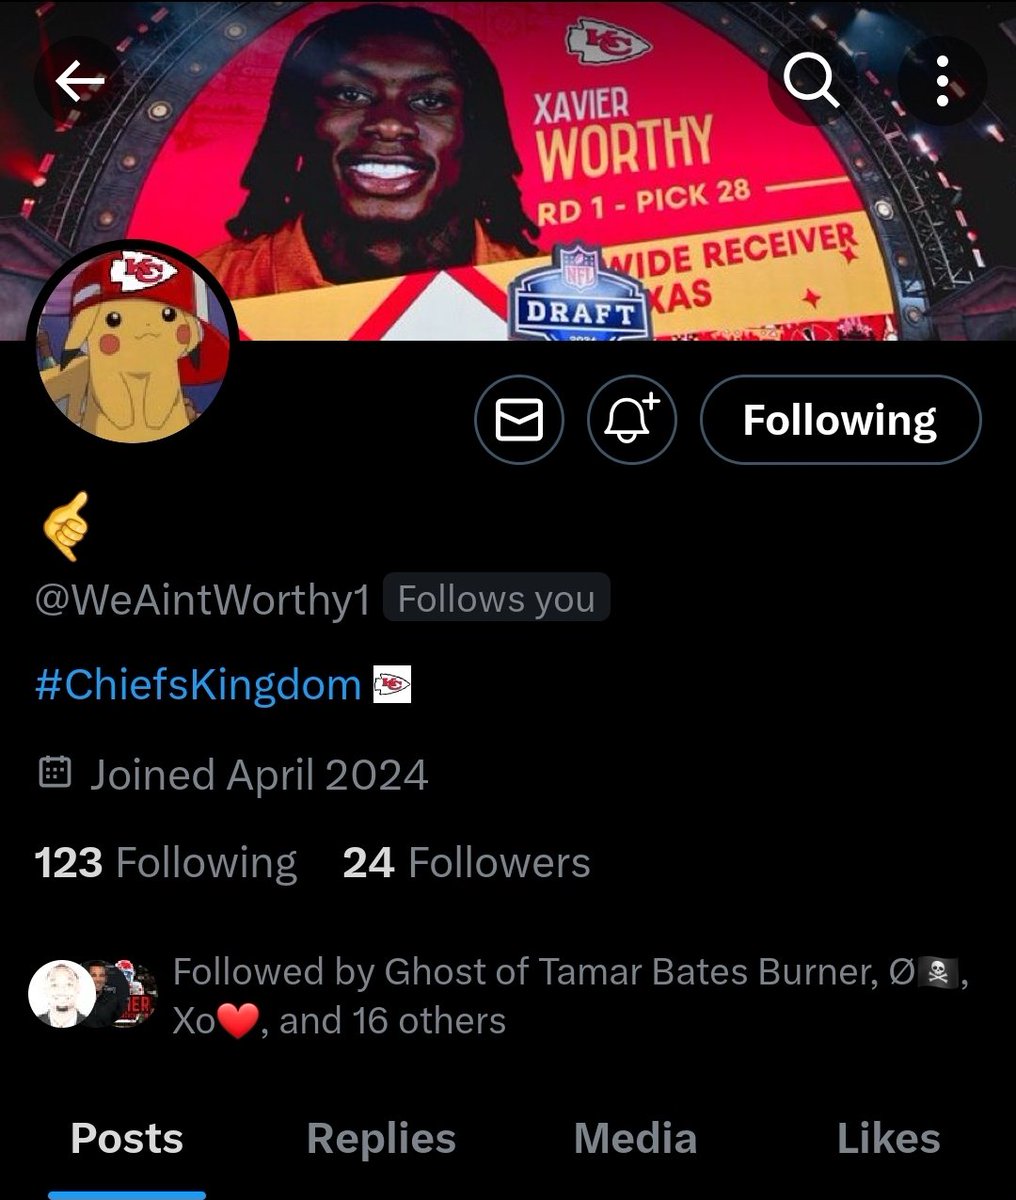 Shout out to @WeAintWorthy1 new account. Good takes and wholesome interactions a great follow for anyone